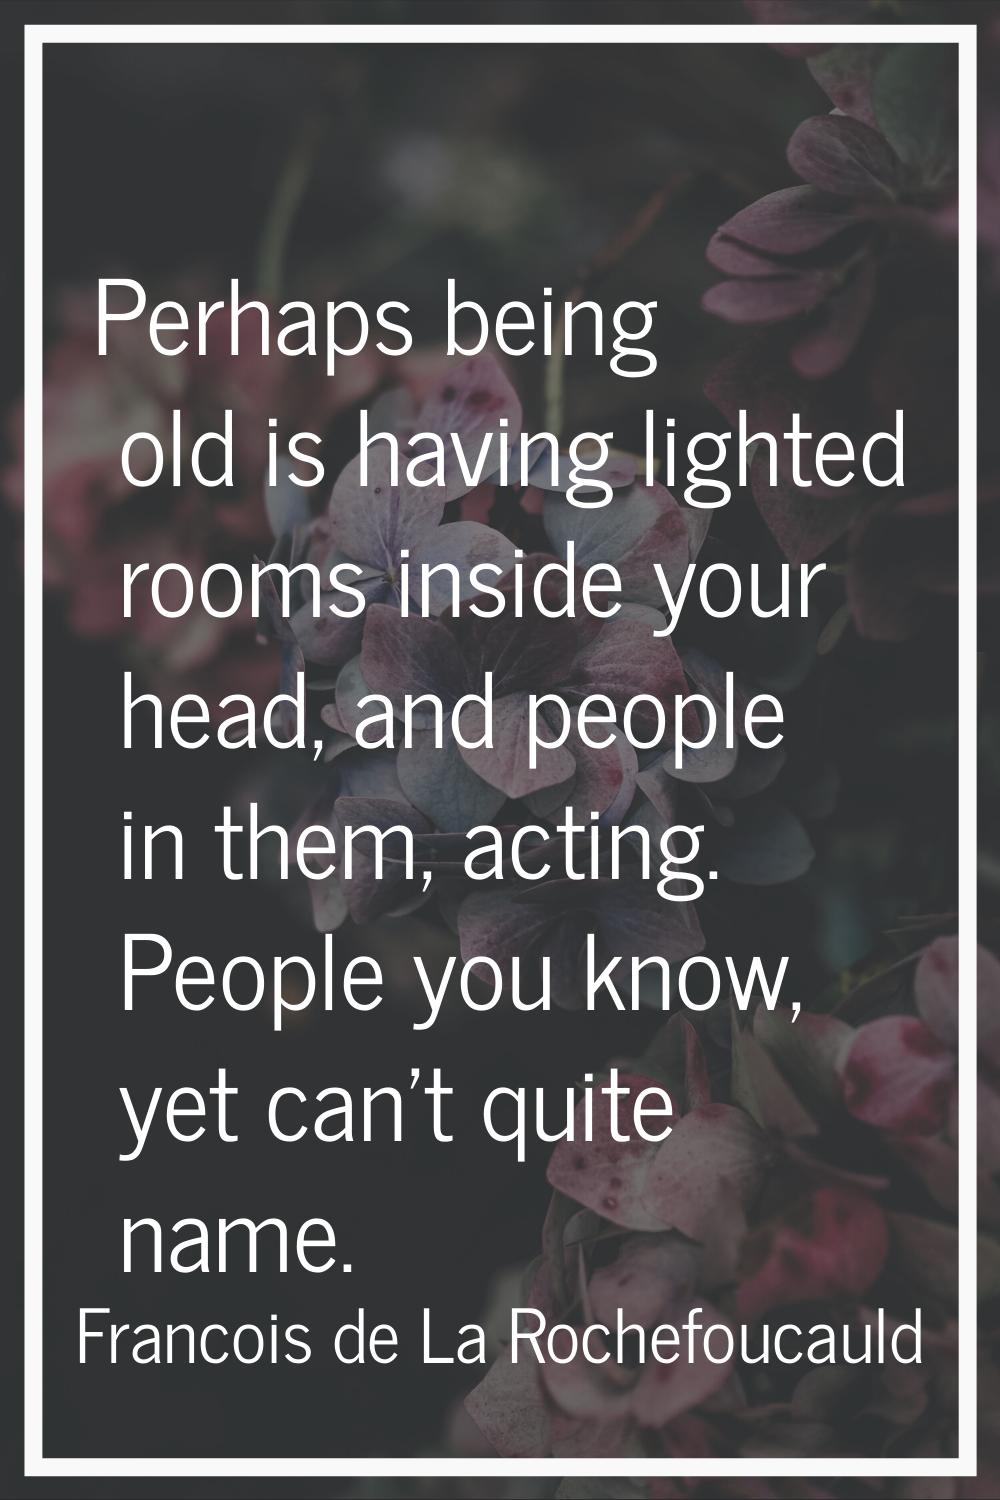 Perhaps being old is having lighted rooms inside your head, and people in them, acting. People you 